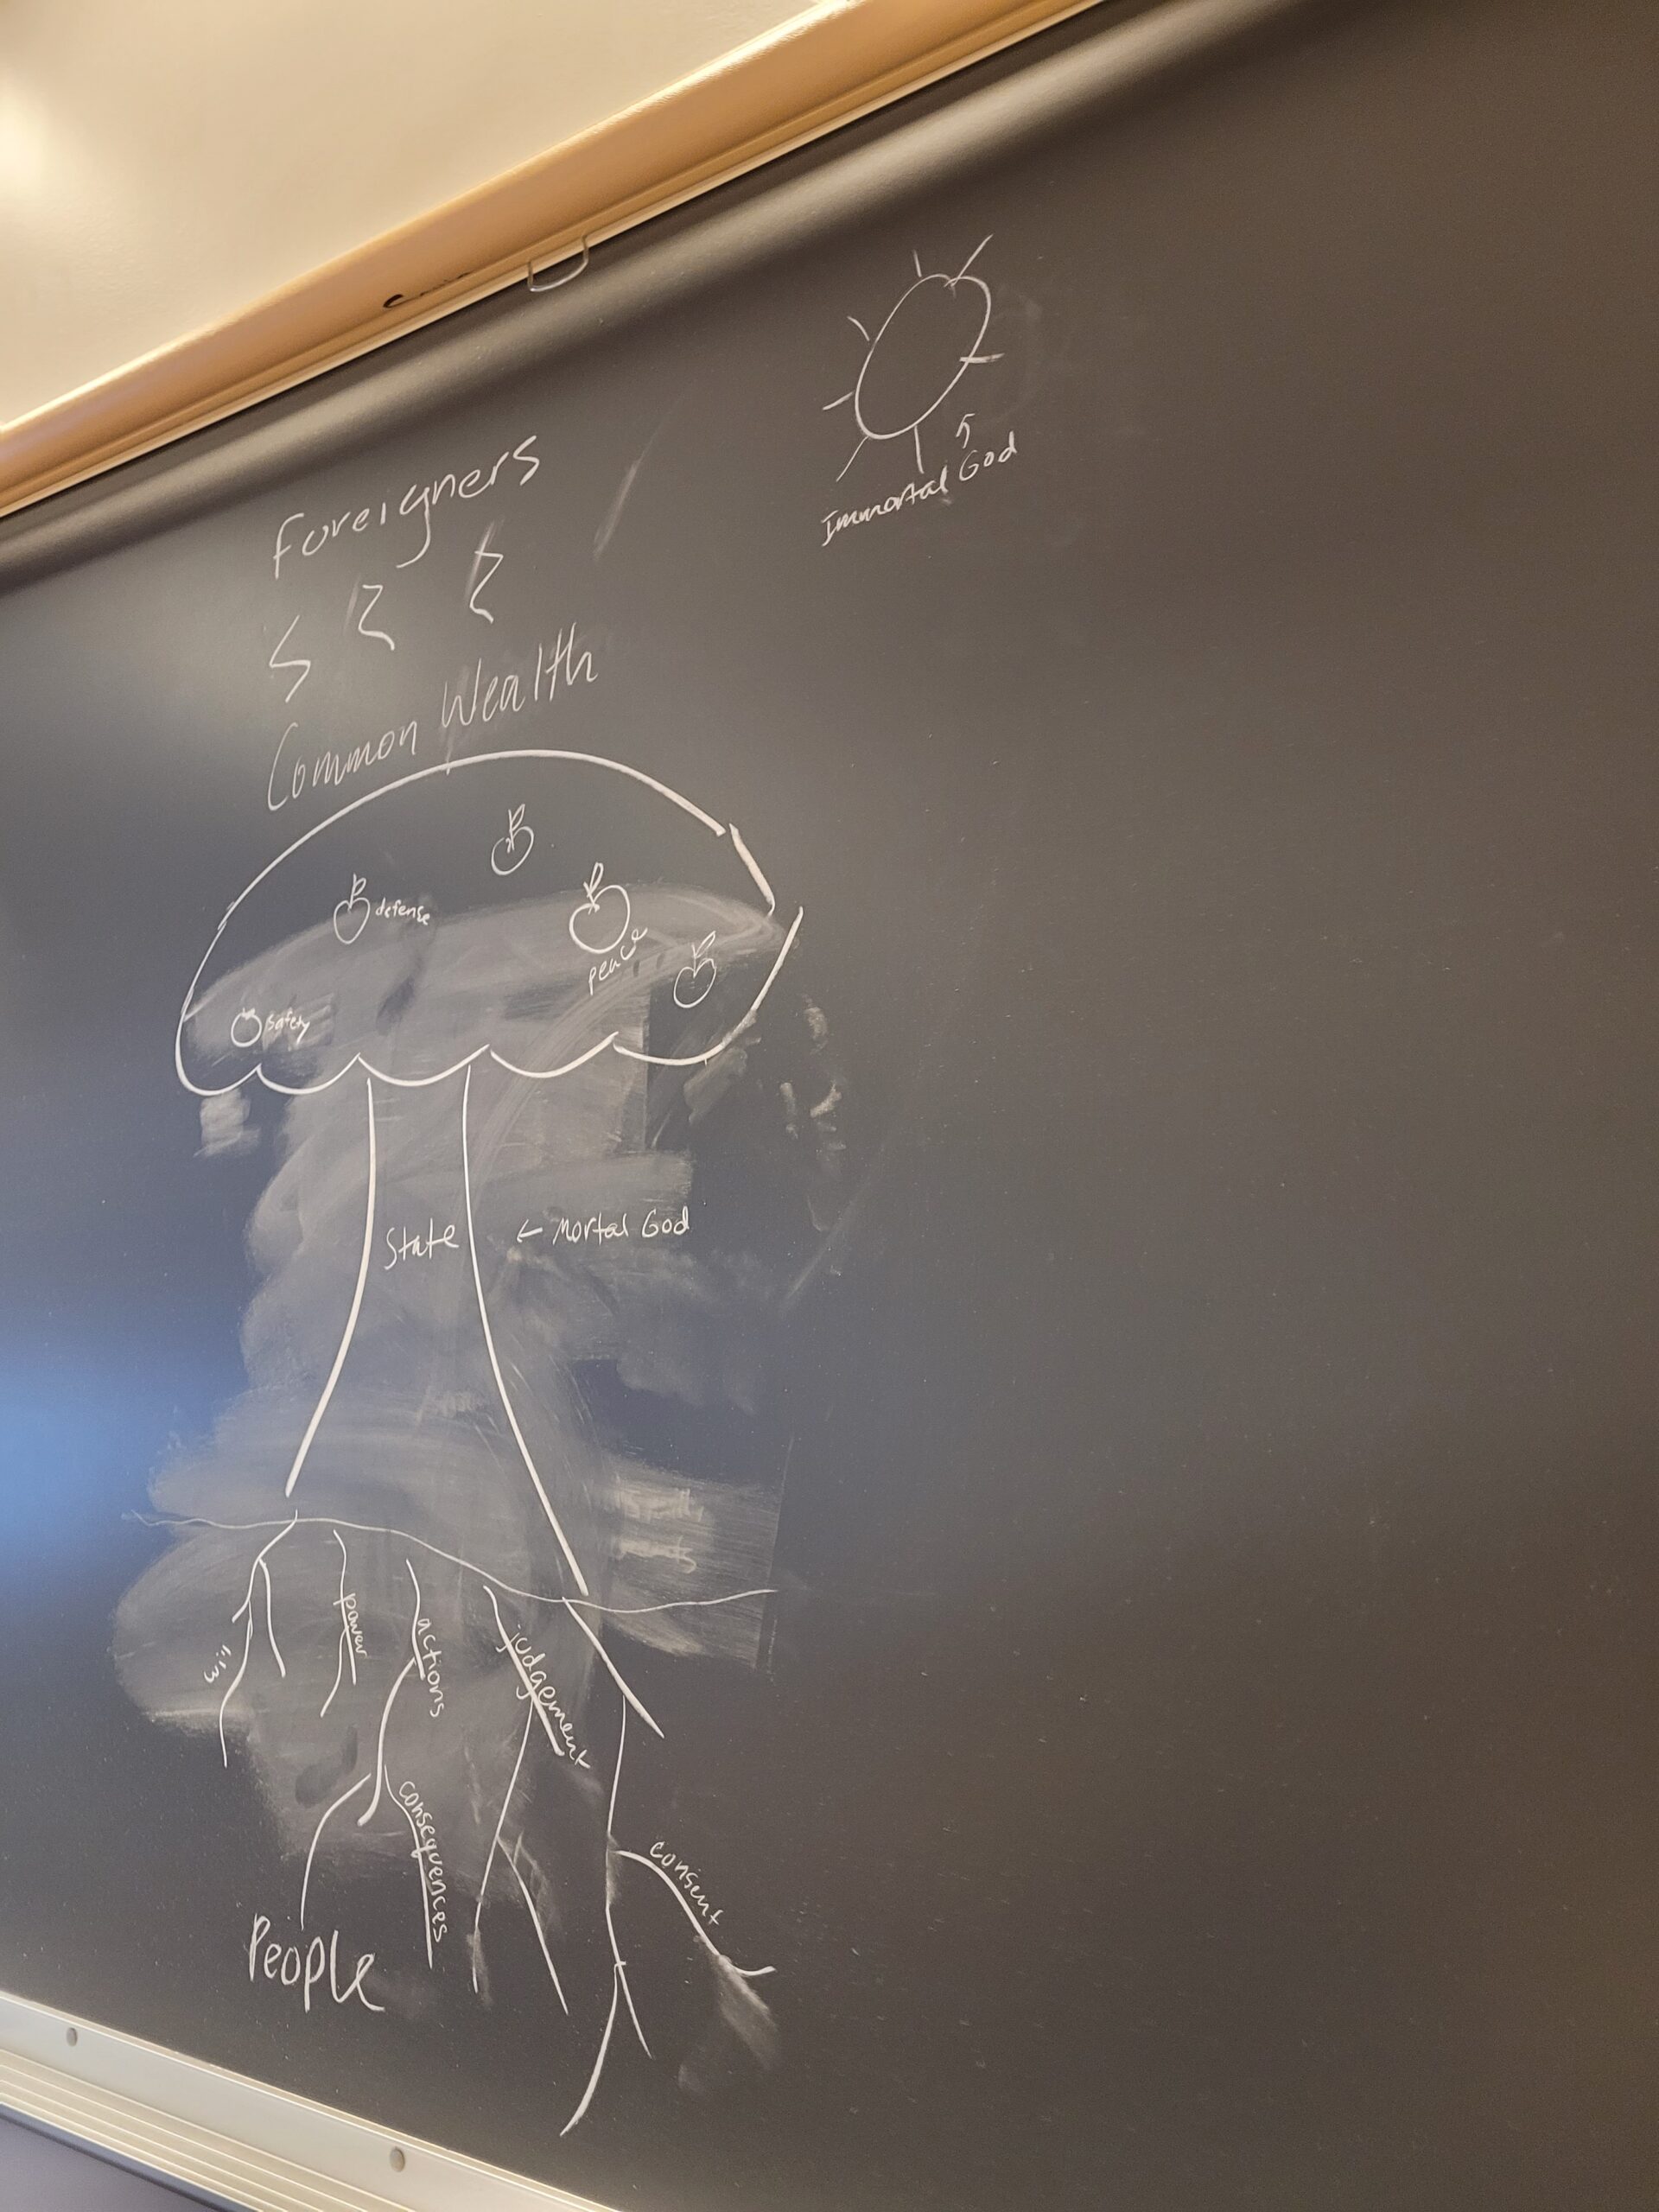 chalk drawing of tree labeled "state" with roots labeled "people" bearing fruits labeled "peace" and "safety" being attacked by lightening bolts labeled "foreigners" while sun labeled "immortal god" shines above